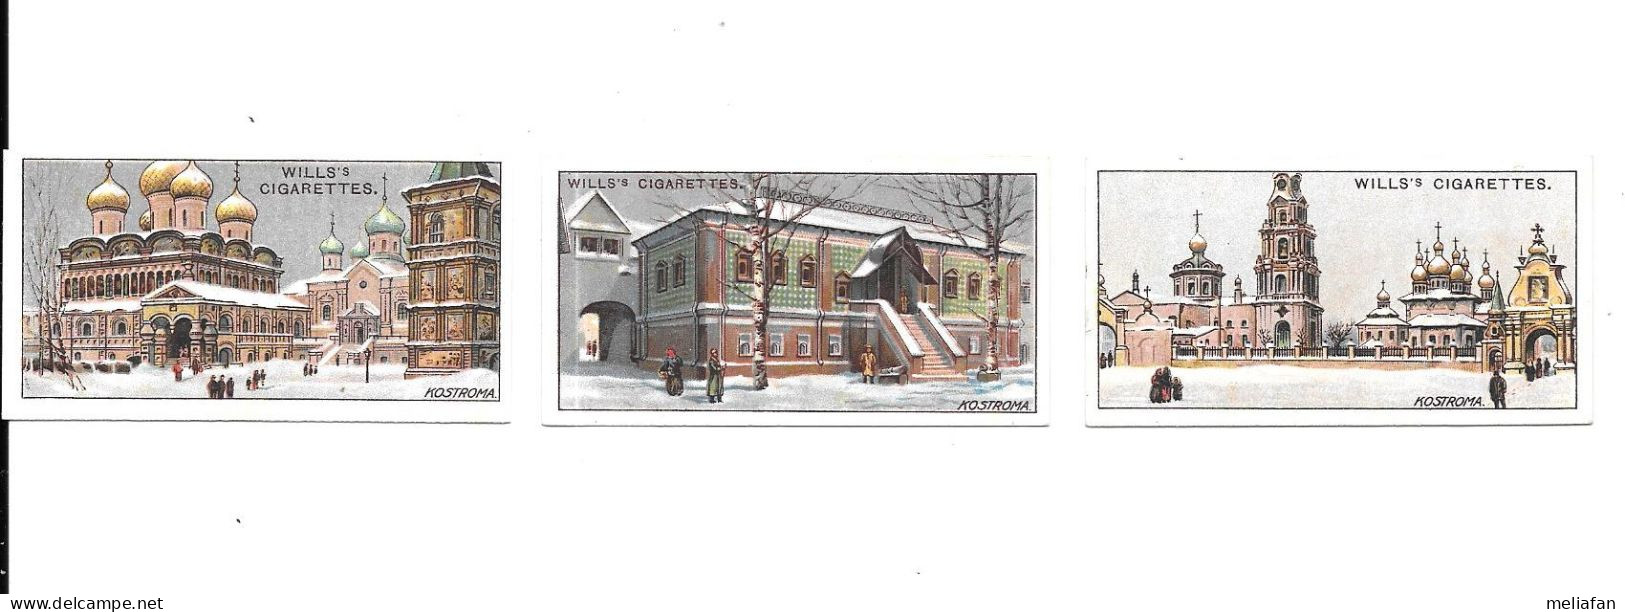 DK51 - CARTES CIGARETTES WILLS - GEMS OF RUSSIAN ARCHITECTURE - KOSTROMA - Wills